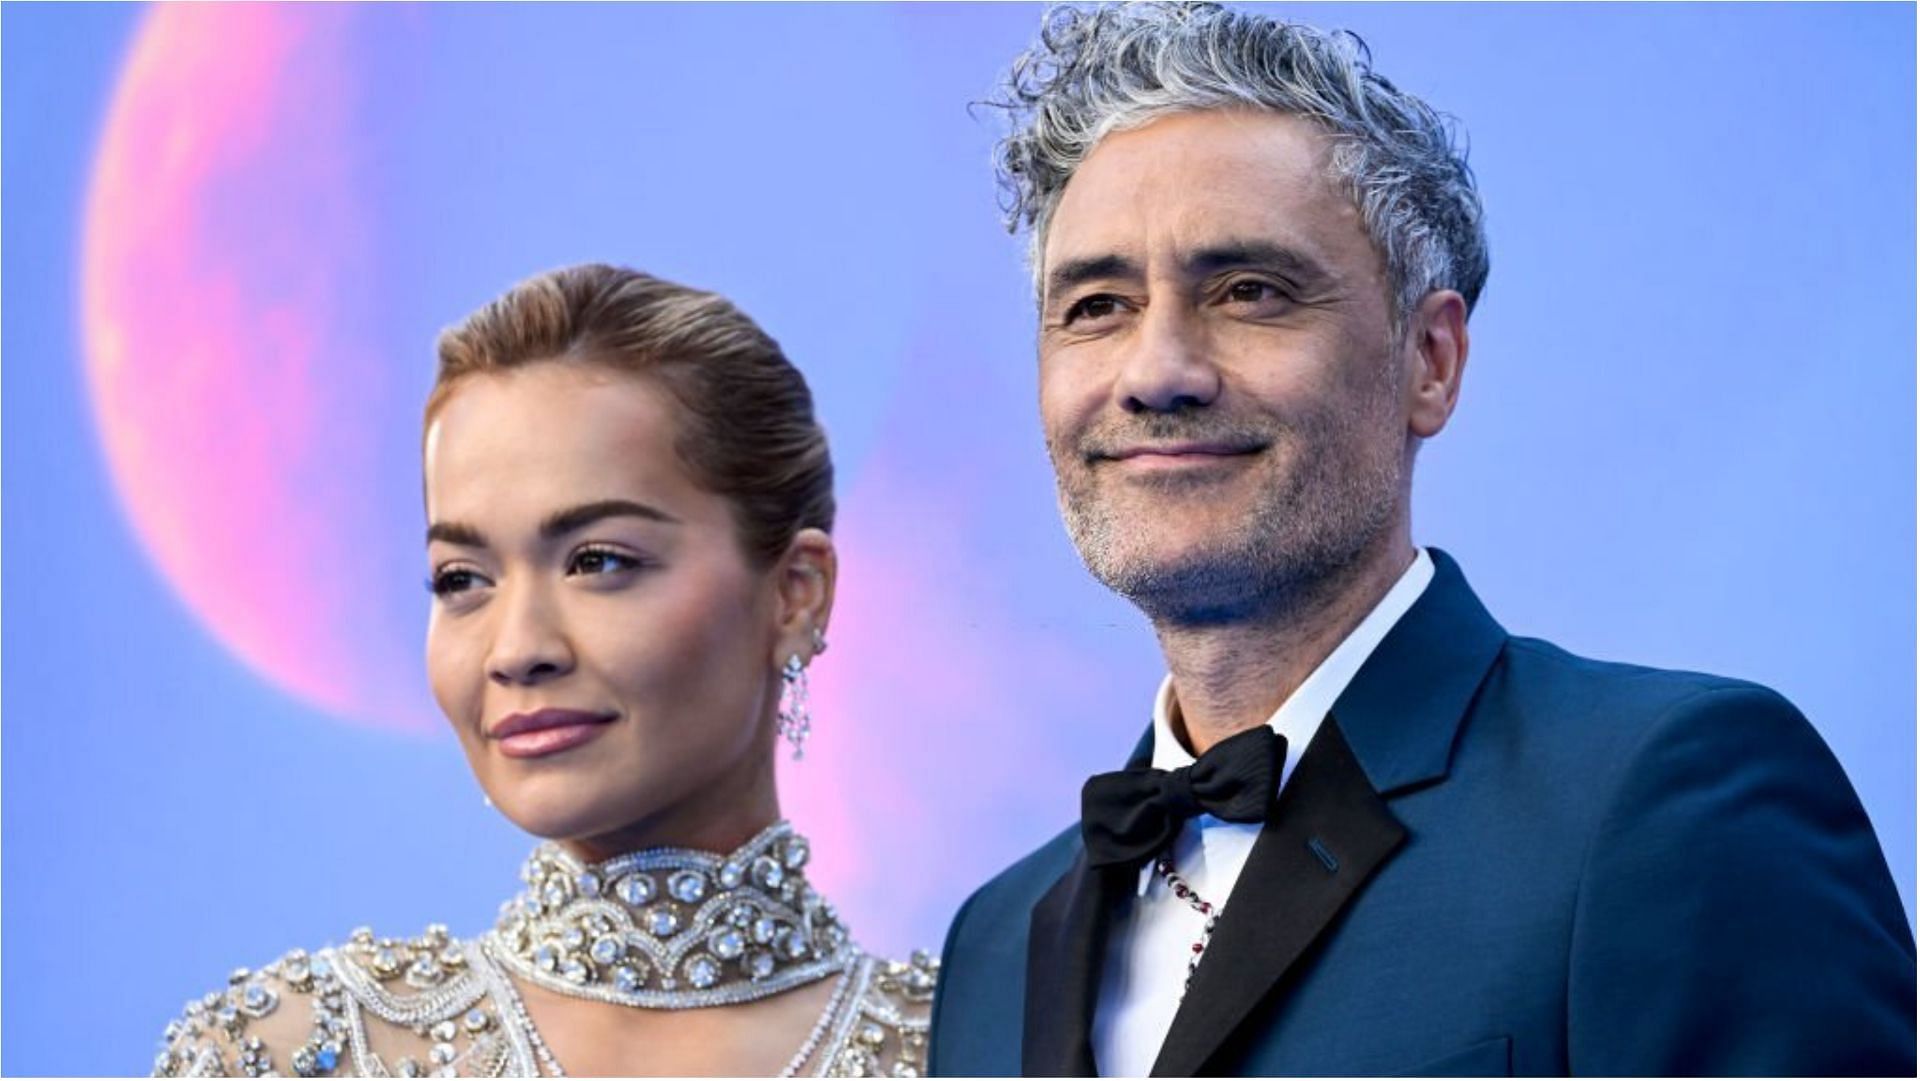 Taika Waititi and Rita Ora dated for a year before they got married (Image via Gareth Cattermole/Getty Images)